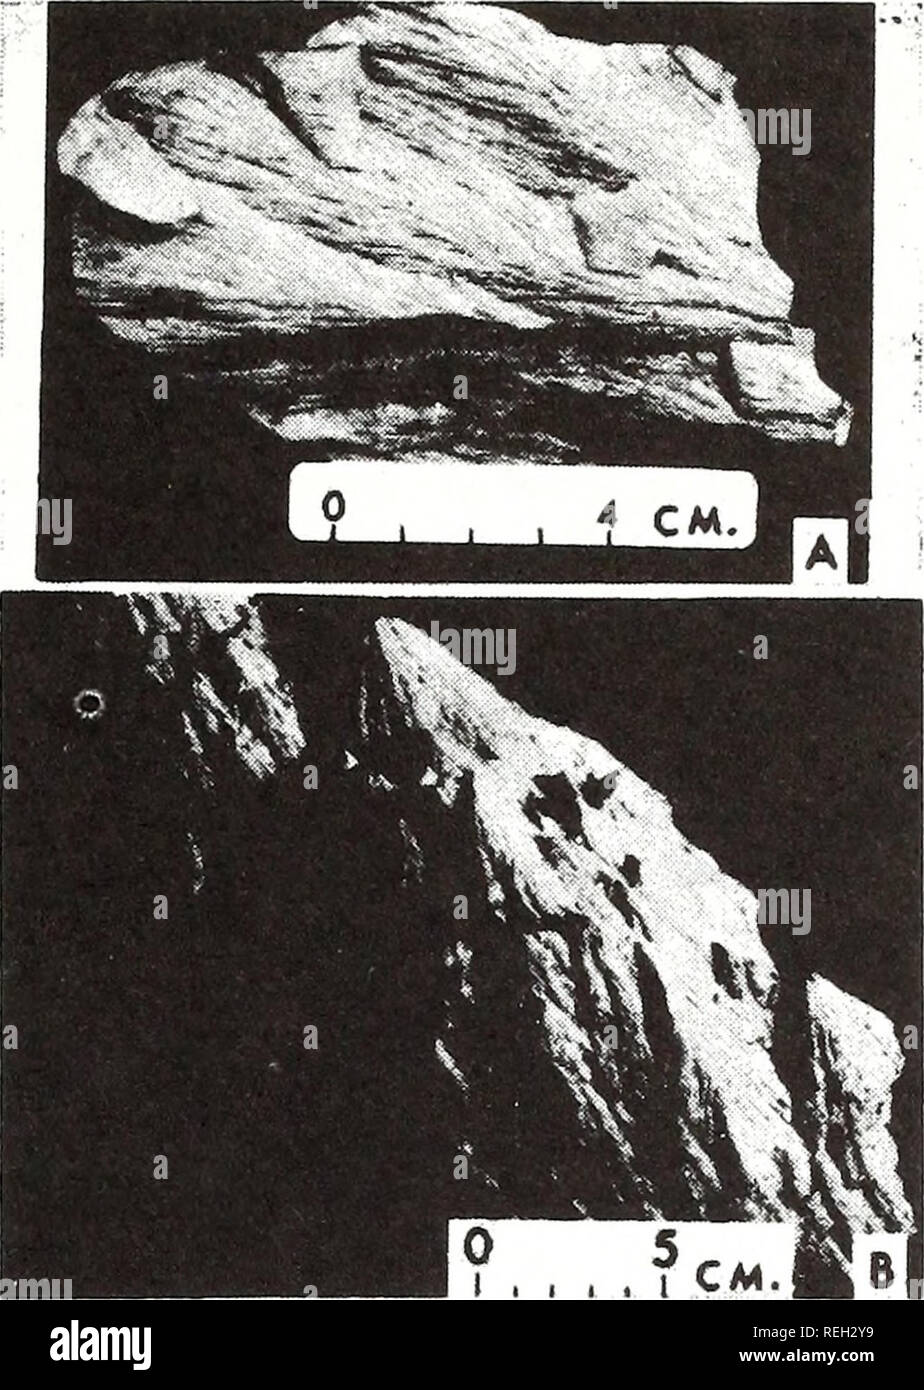 . Collected reprints / Atlantic Oceanographic and Meteorological Laboratories [and] Pacific Oceanographic Laboratories. Oceanography Periodicals.. FIGURE 1 — A. Fragment of shatter- coned Permian dolomite from the Sierra Madera astrobleme in Texas. The horse- tail-like packets of converging striations are a hallmark of this type of shock frac- turing. B. A nest of shatter ccnes about 10 inches across in a fragment of Knox dolomite from the central uplift of the Wells Creek Basin astrobleme of Tennessee. The stacked, shoulder-upon-shoulder aspect of the cones, the striations and the common orie Stock Photo